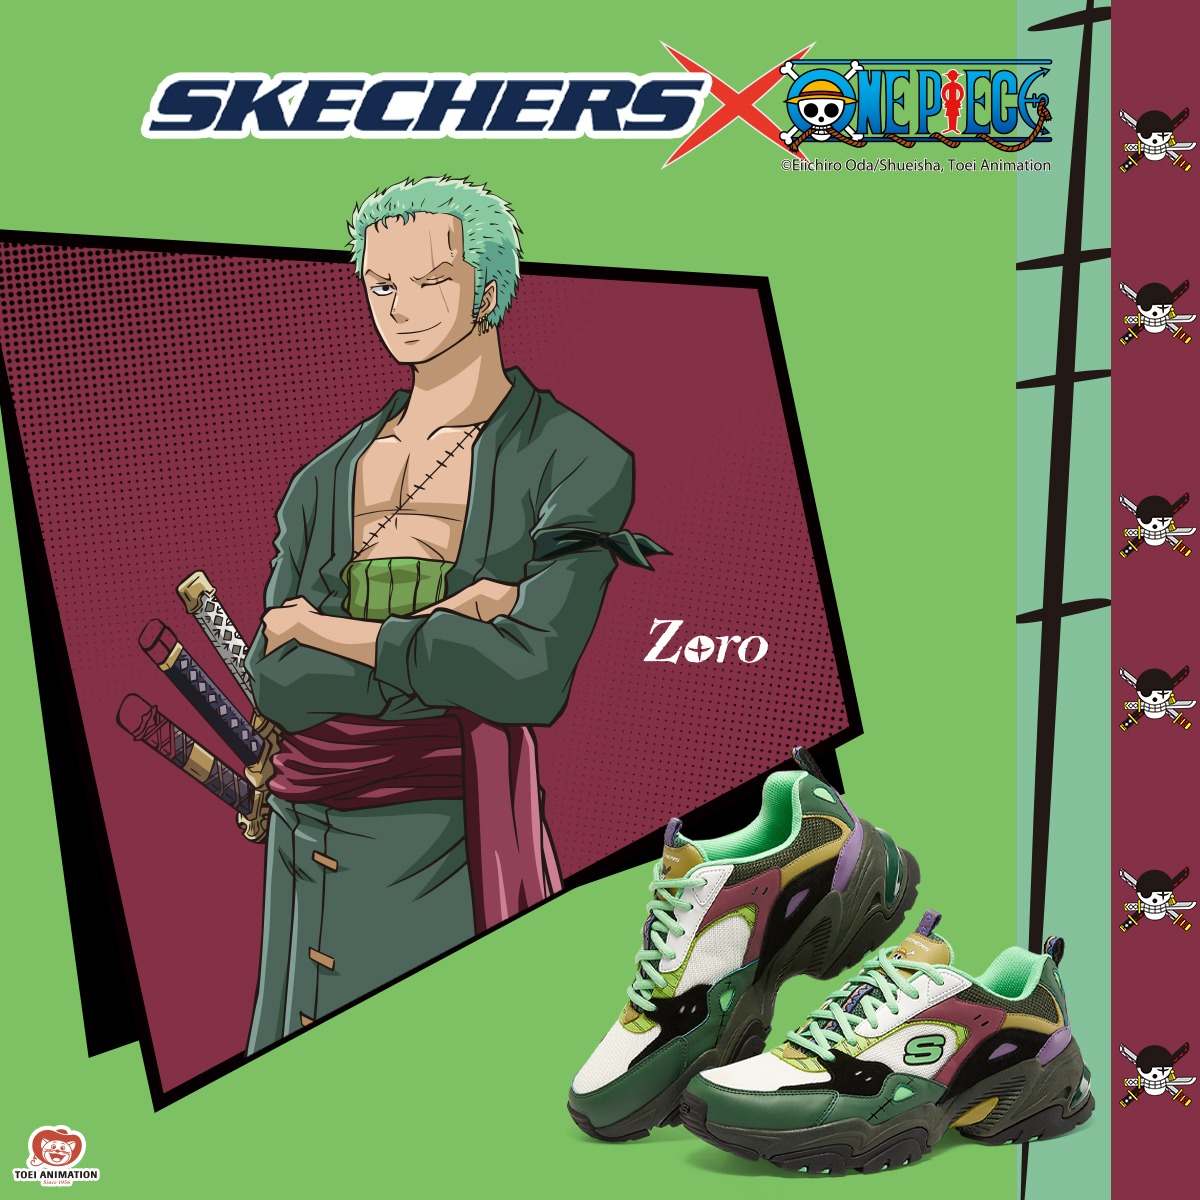 Skechers x One Piece Collection Featuring Zoro - Skechers X One Piece 系列，动漫迷们的福音！